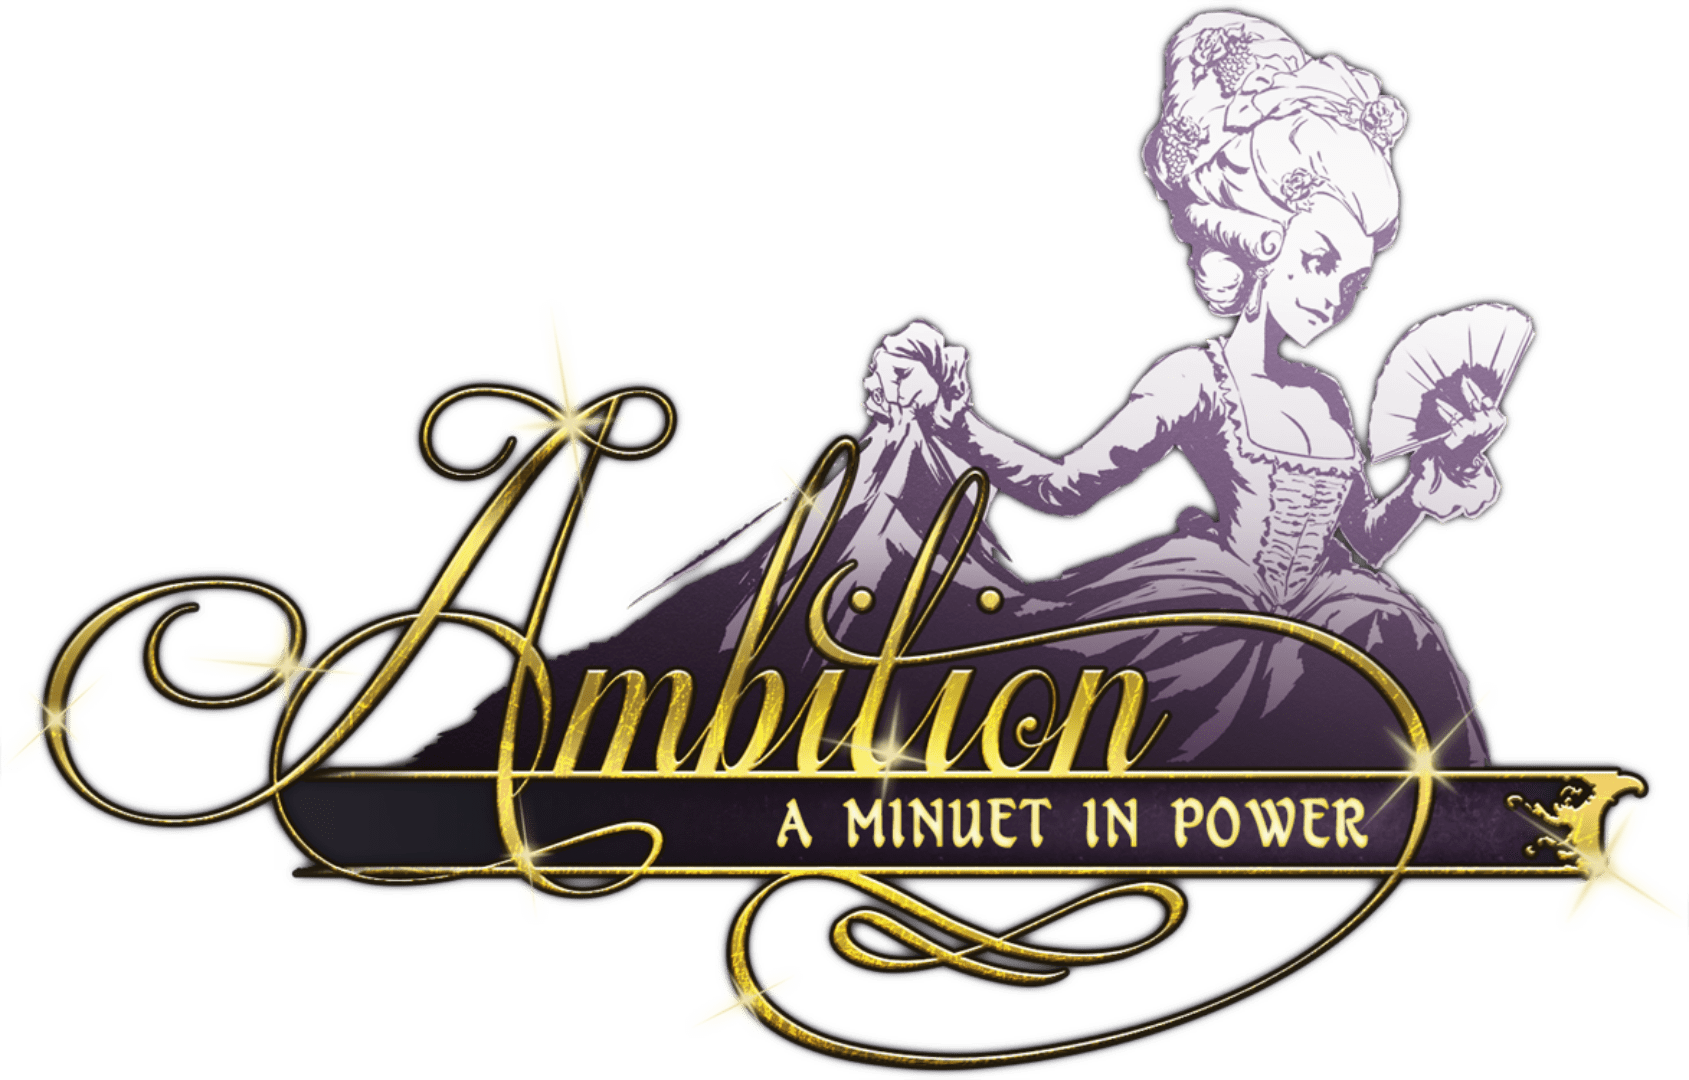 Ambition: A Minuet in Power Logo